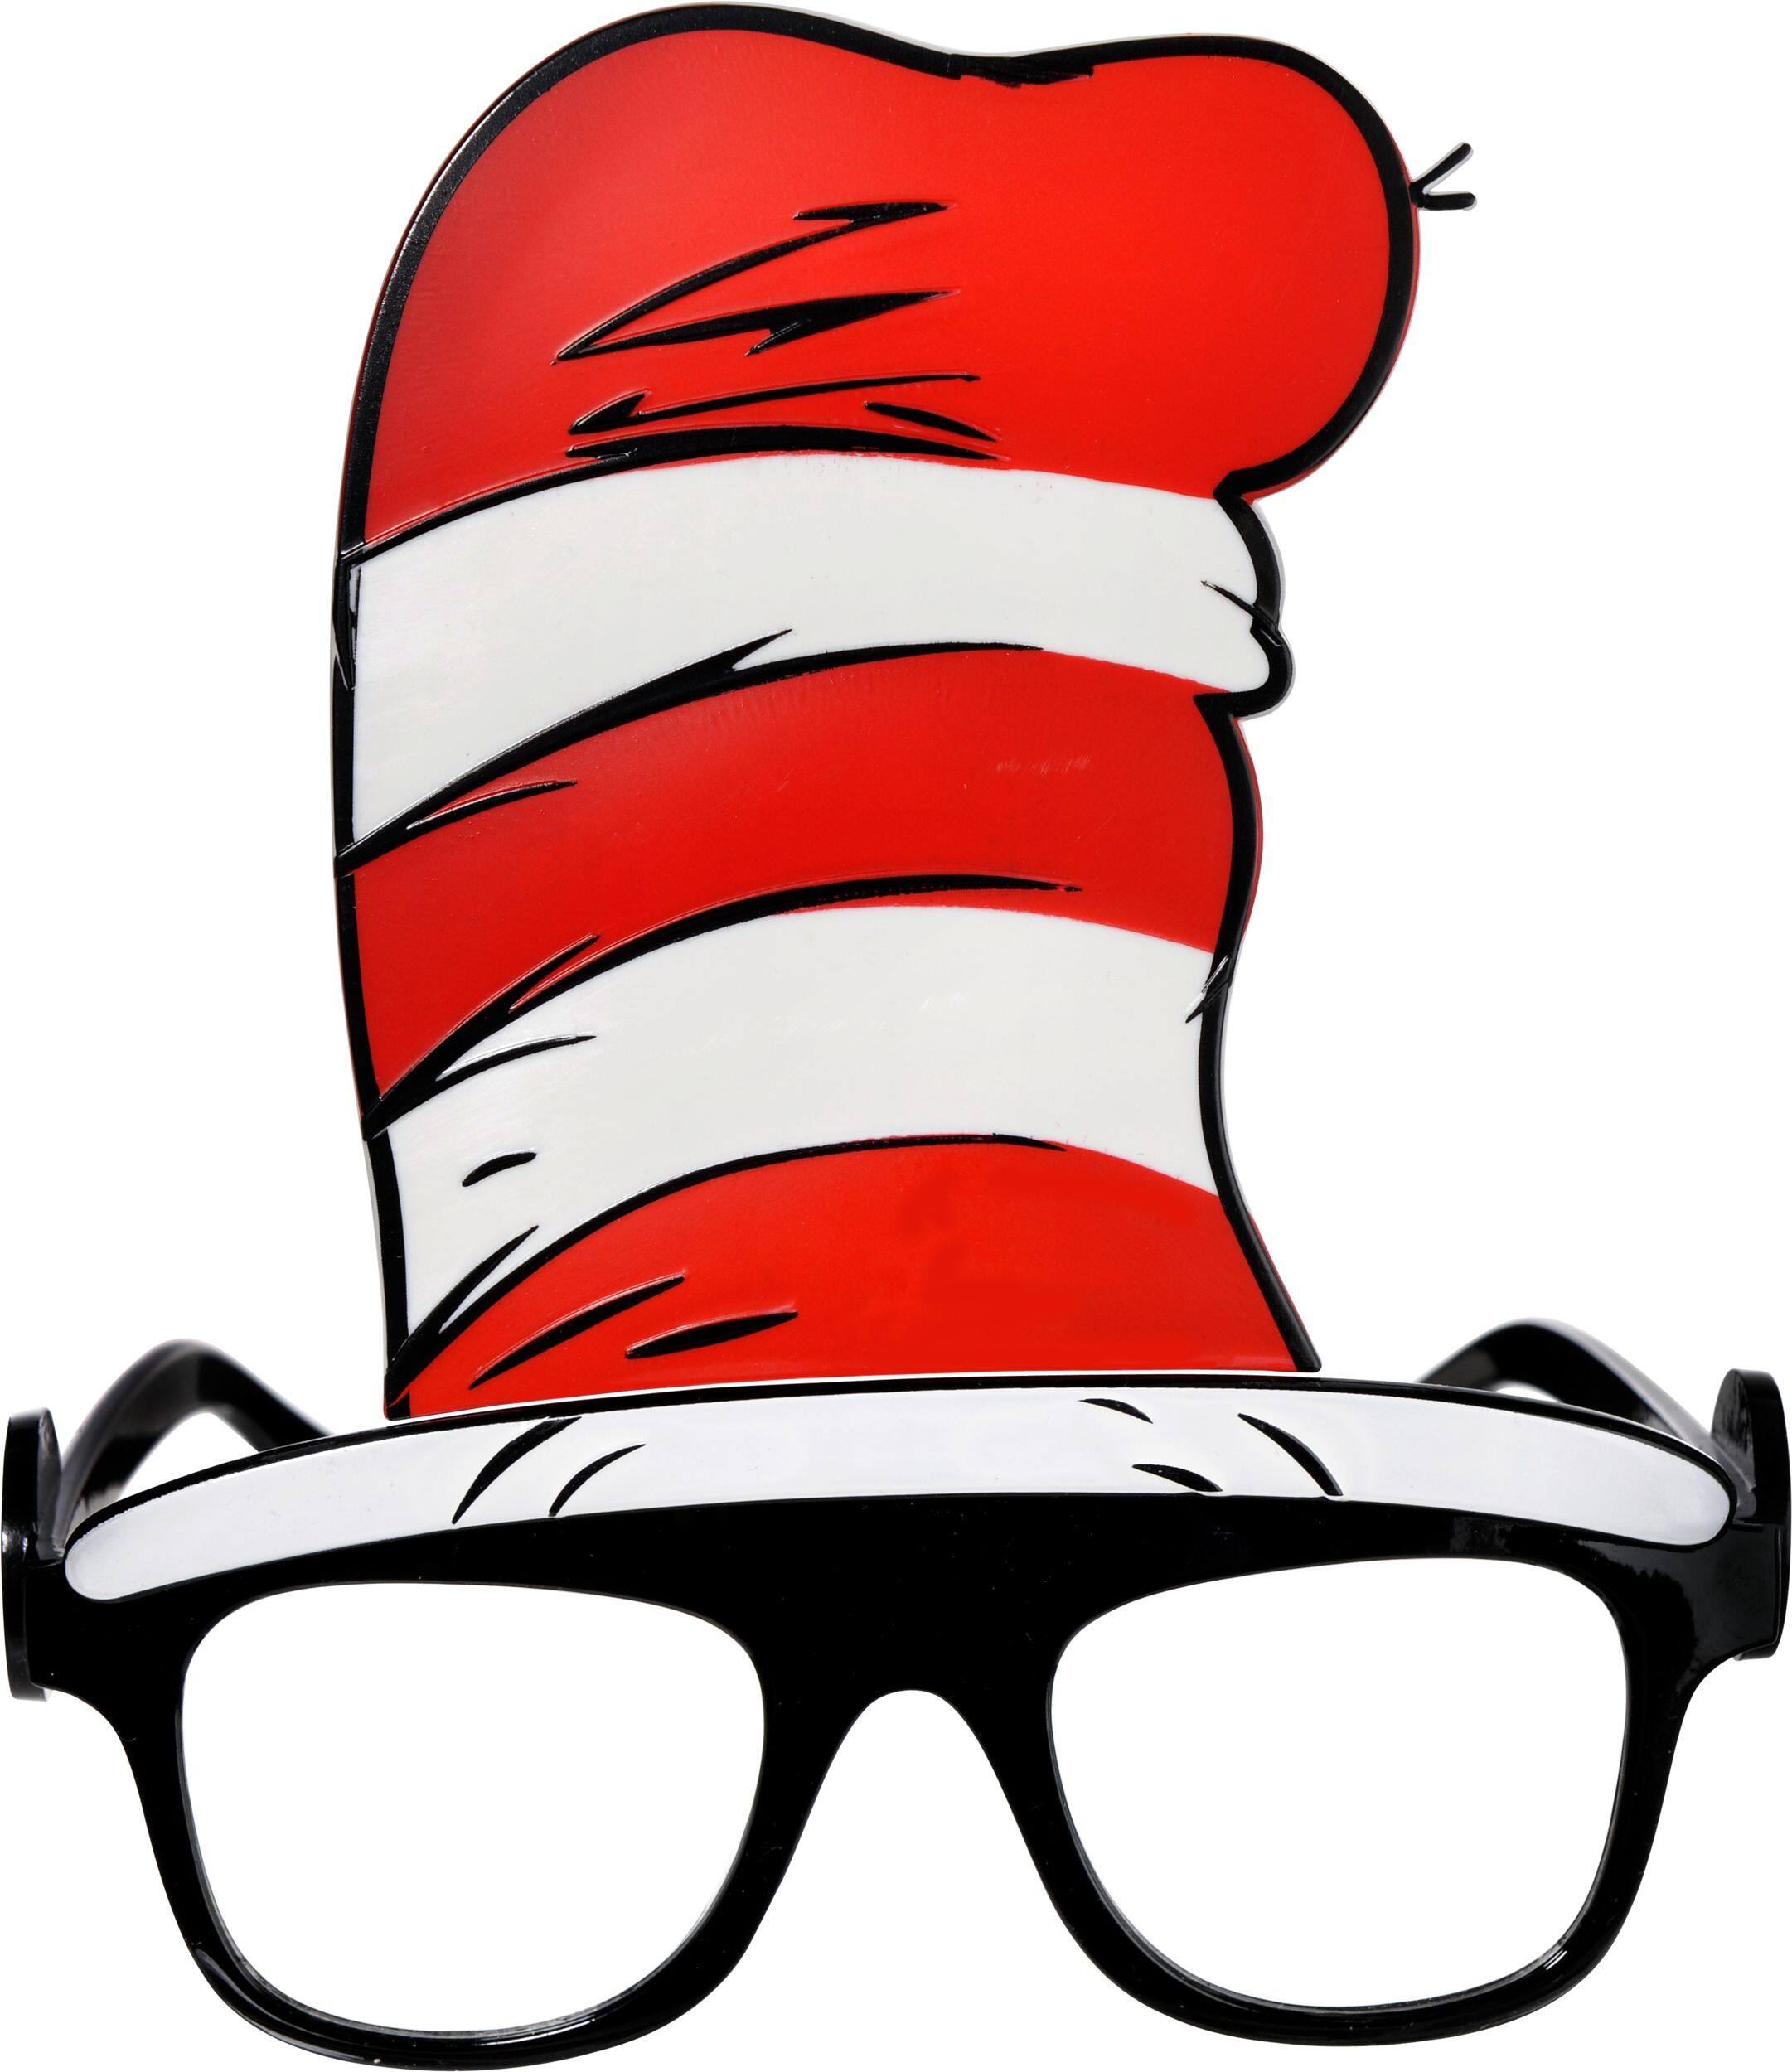 Dr. Seuss Cat in the Hat Glasses for Birthday Party Favours | Canadian Tire